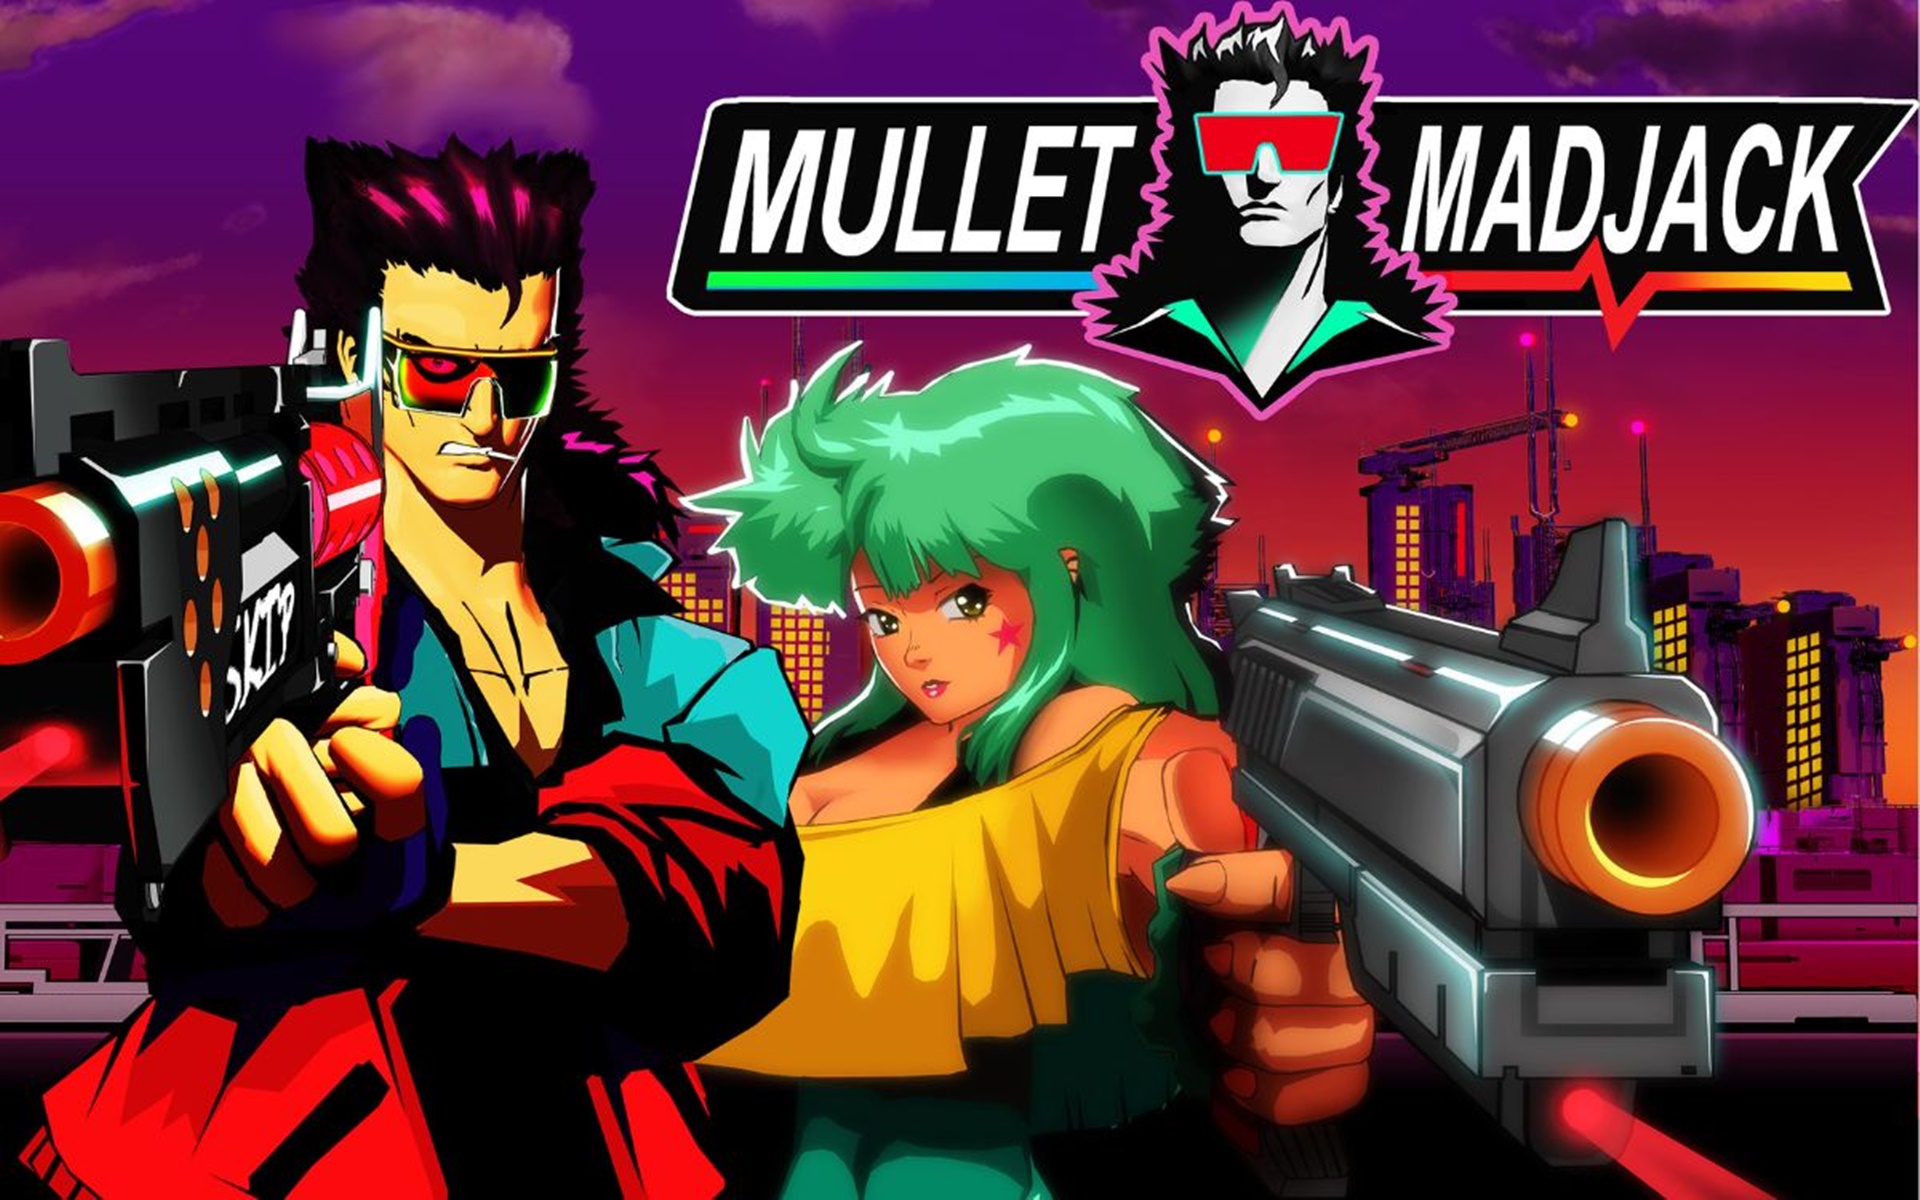 Mullet Madjack will be released on May 15th for PC (Steam).